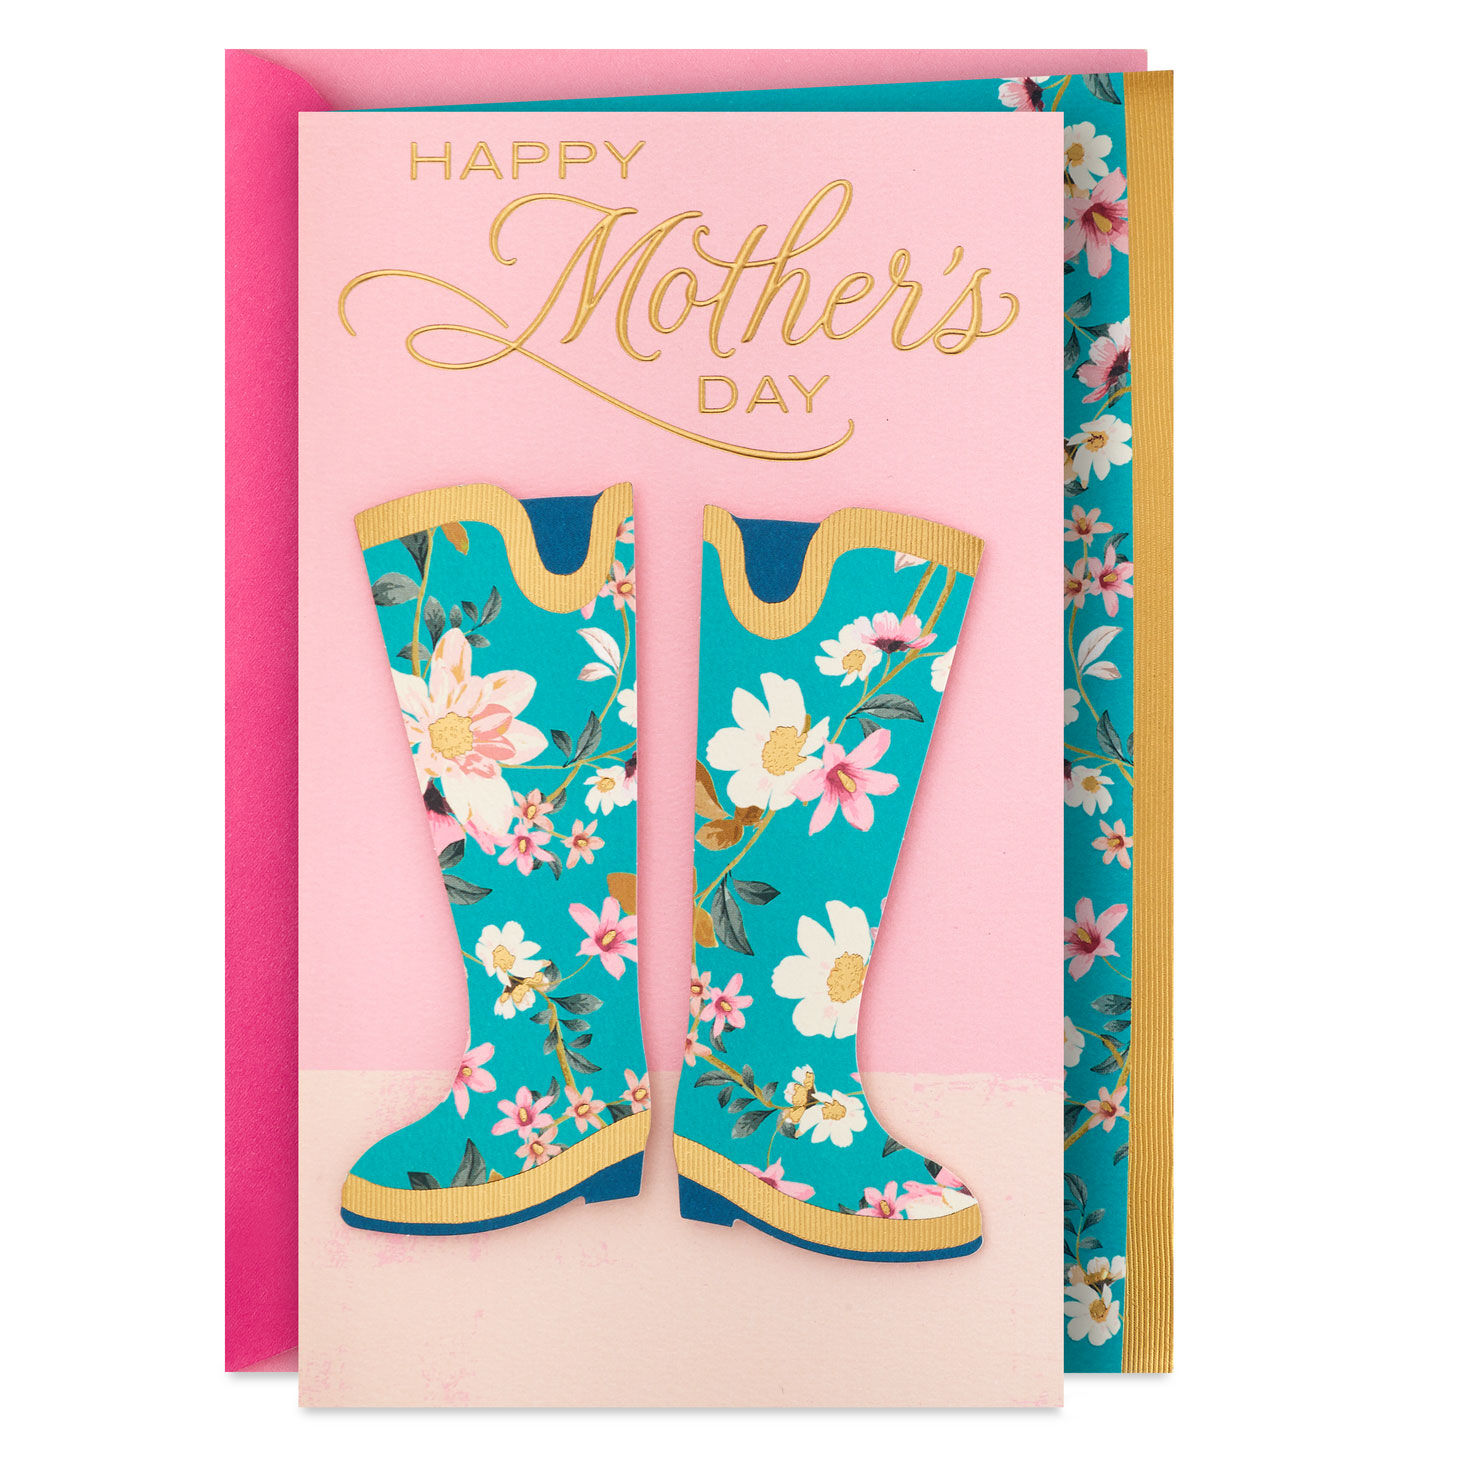 Happy, Warm Wishes for You Mother's Day Card for only USD 5.99 | Hallmark